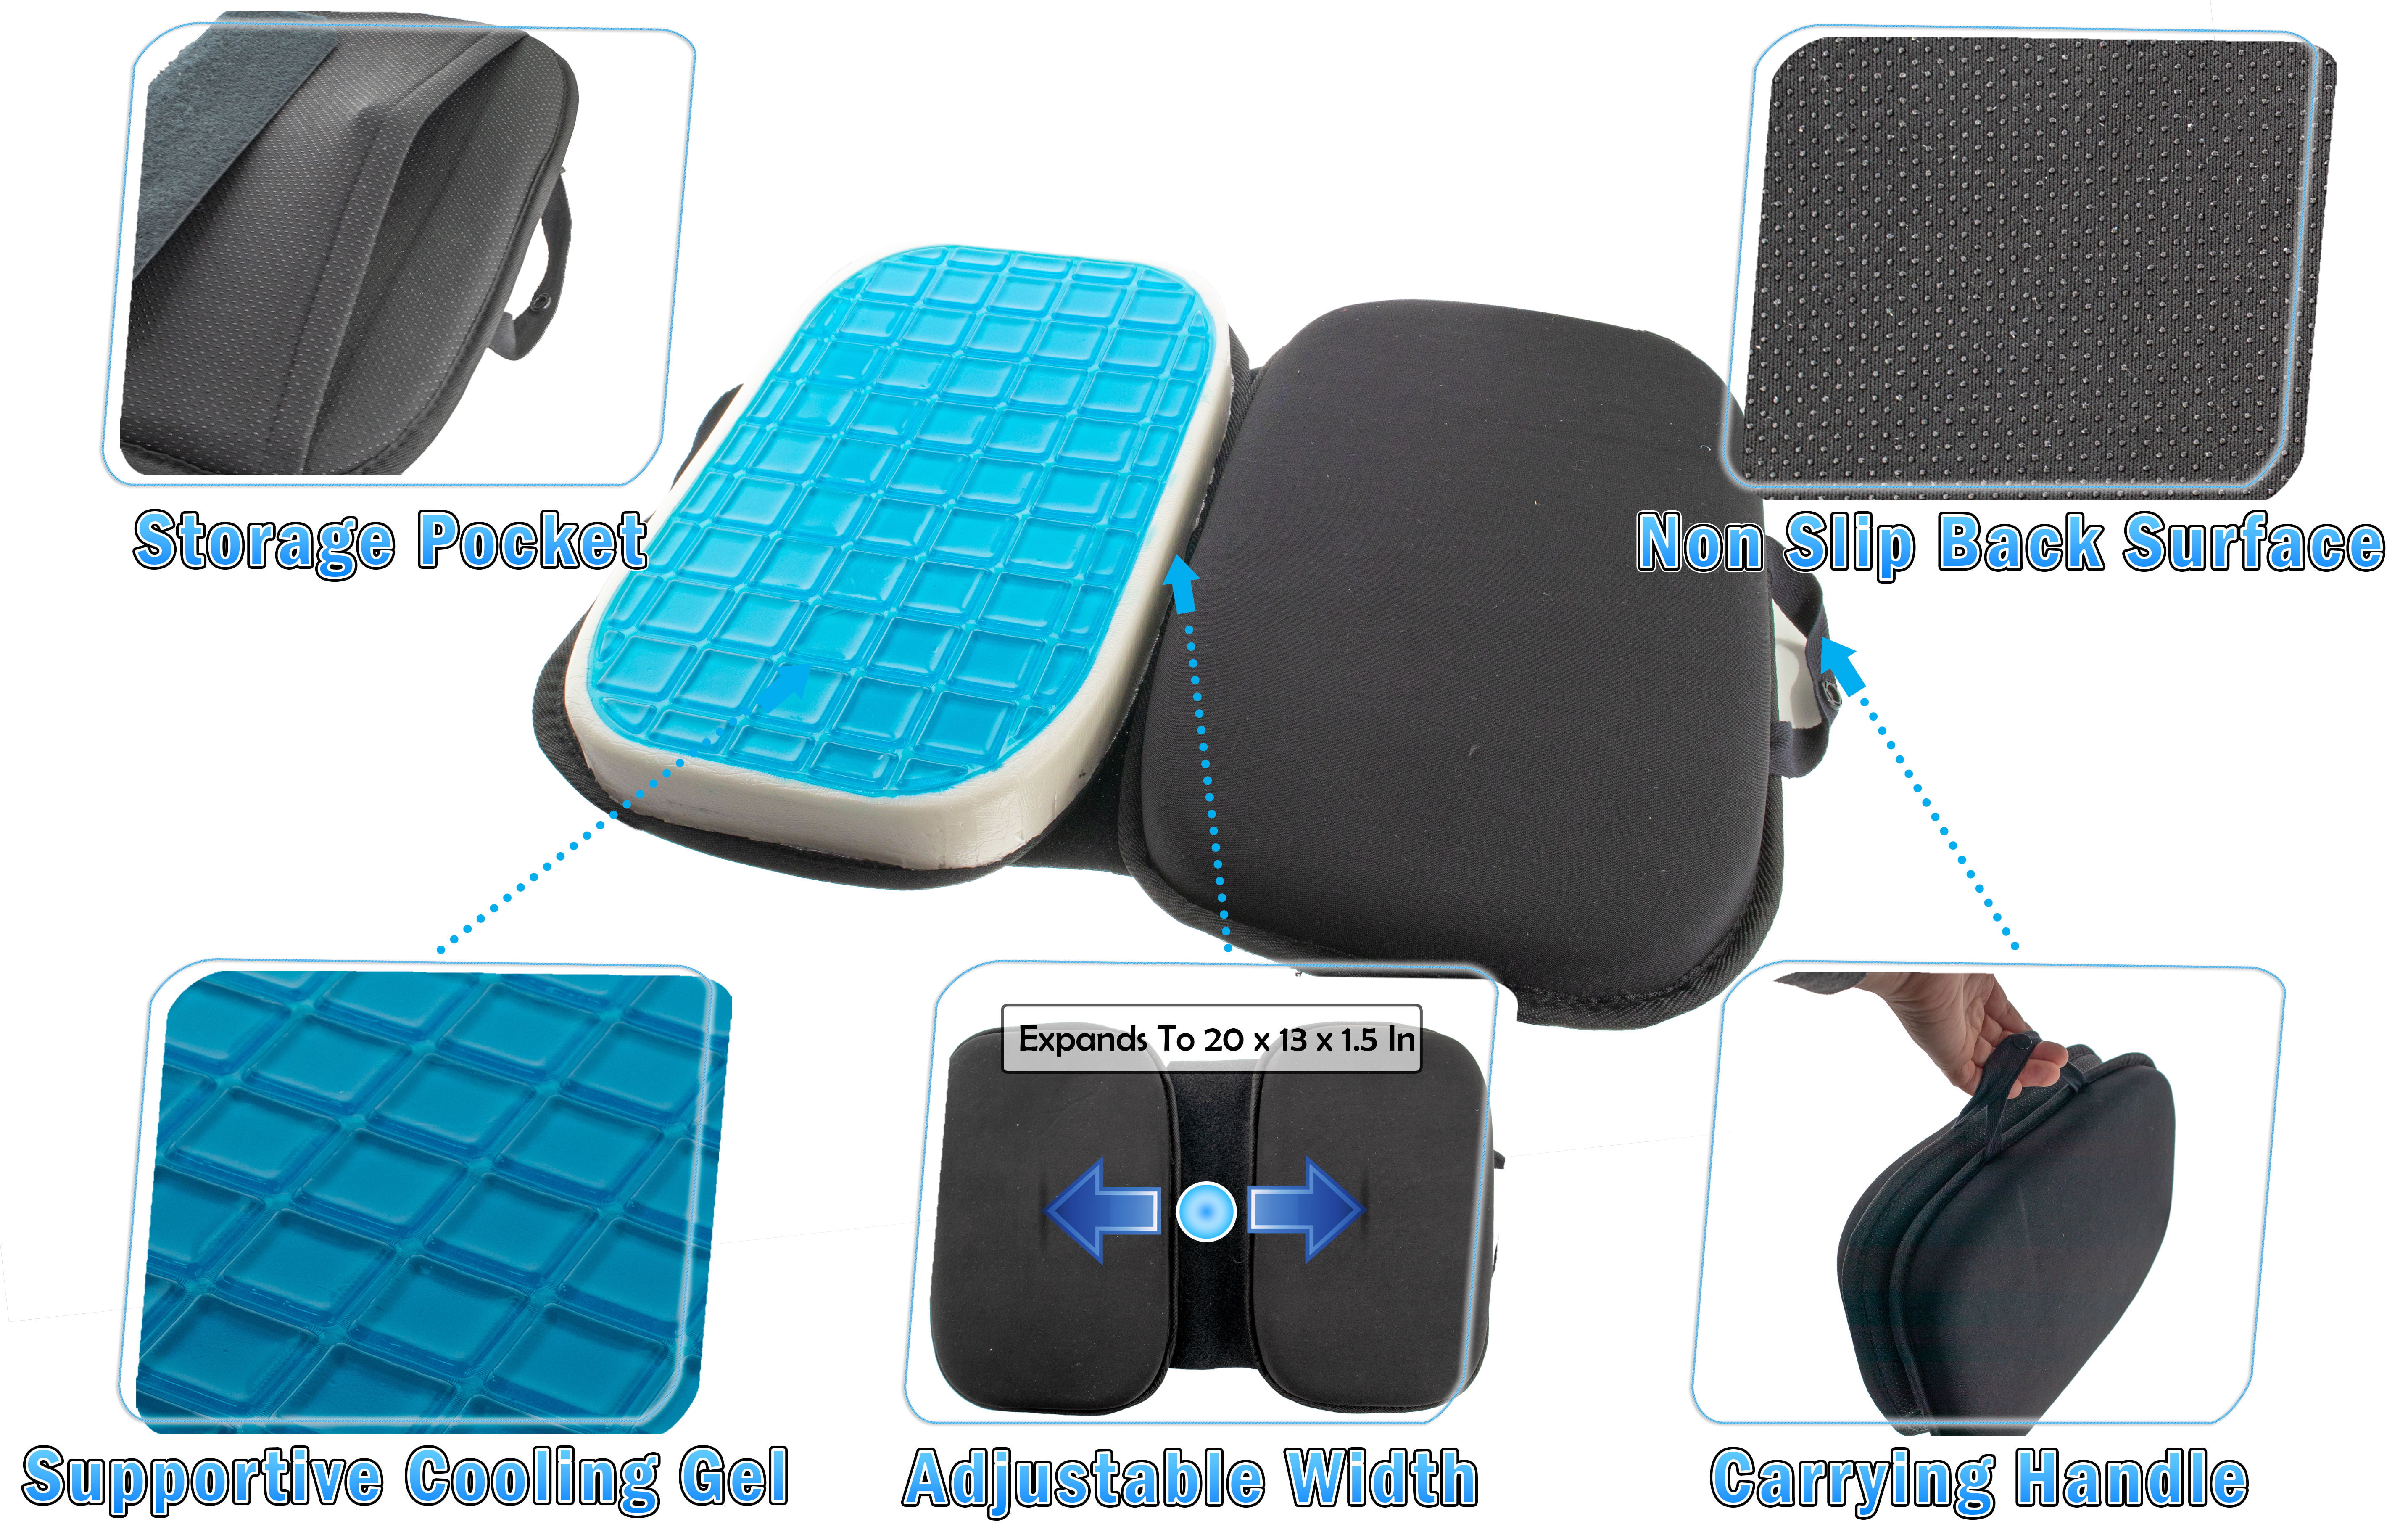  Bingyee Gel Seat Cushion 1.8 Inch Cooling Gel Double Seat  Cushion for Pressure Relief Orthopedic Chair Pads for Home Chair Office  Chair Car Seat Cushion Sweatless Bottom for Long Sitting 